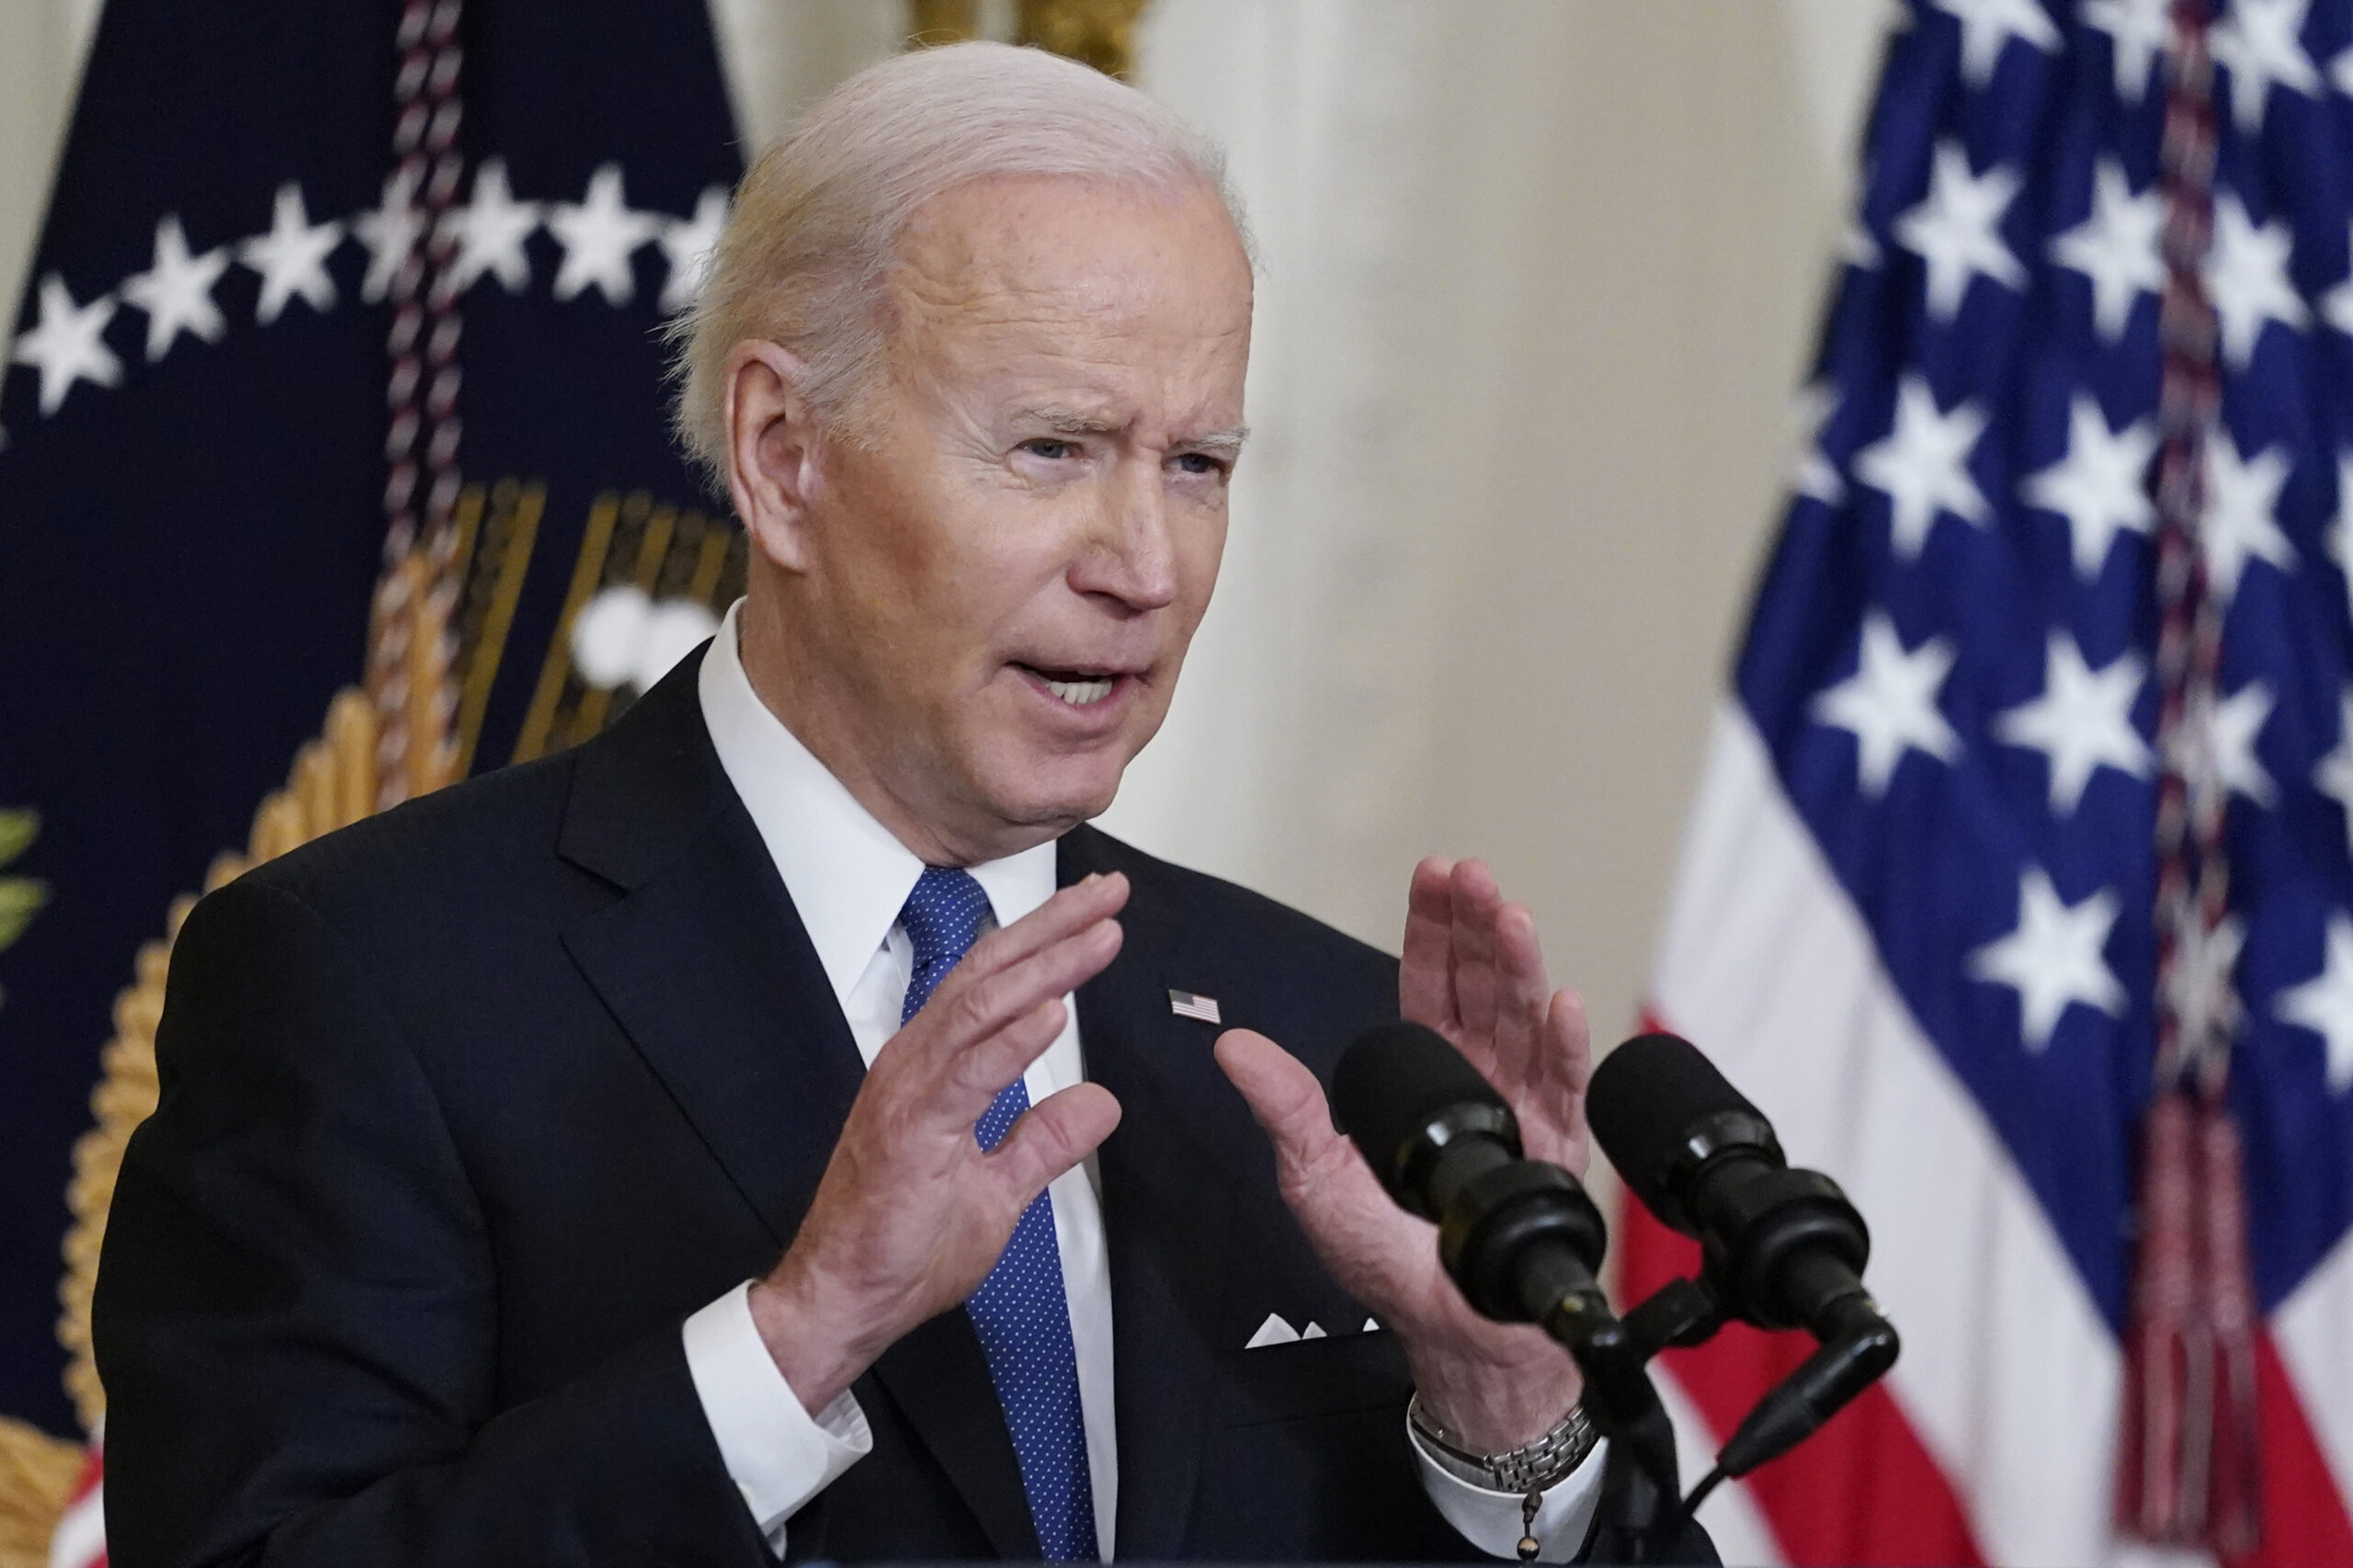 President Joe Biden speaks during an event about the Affordable Care Act, in the East Room of the White House in Washington, Tuesday, April 5, 2022. (AP Photo/Carolyn Kaster)